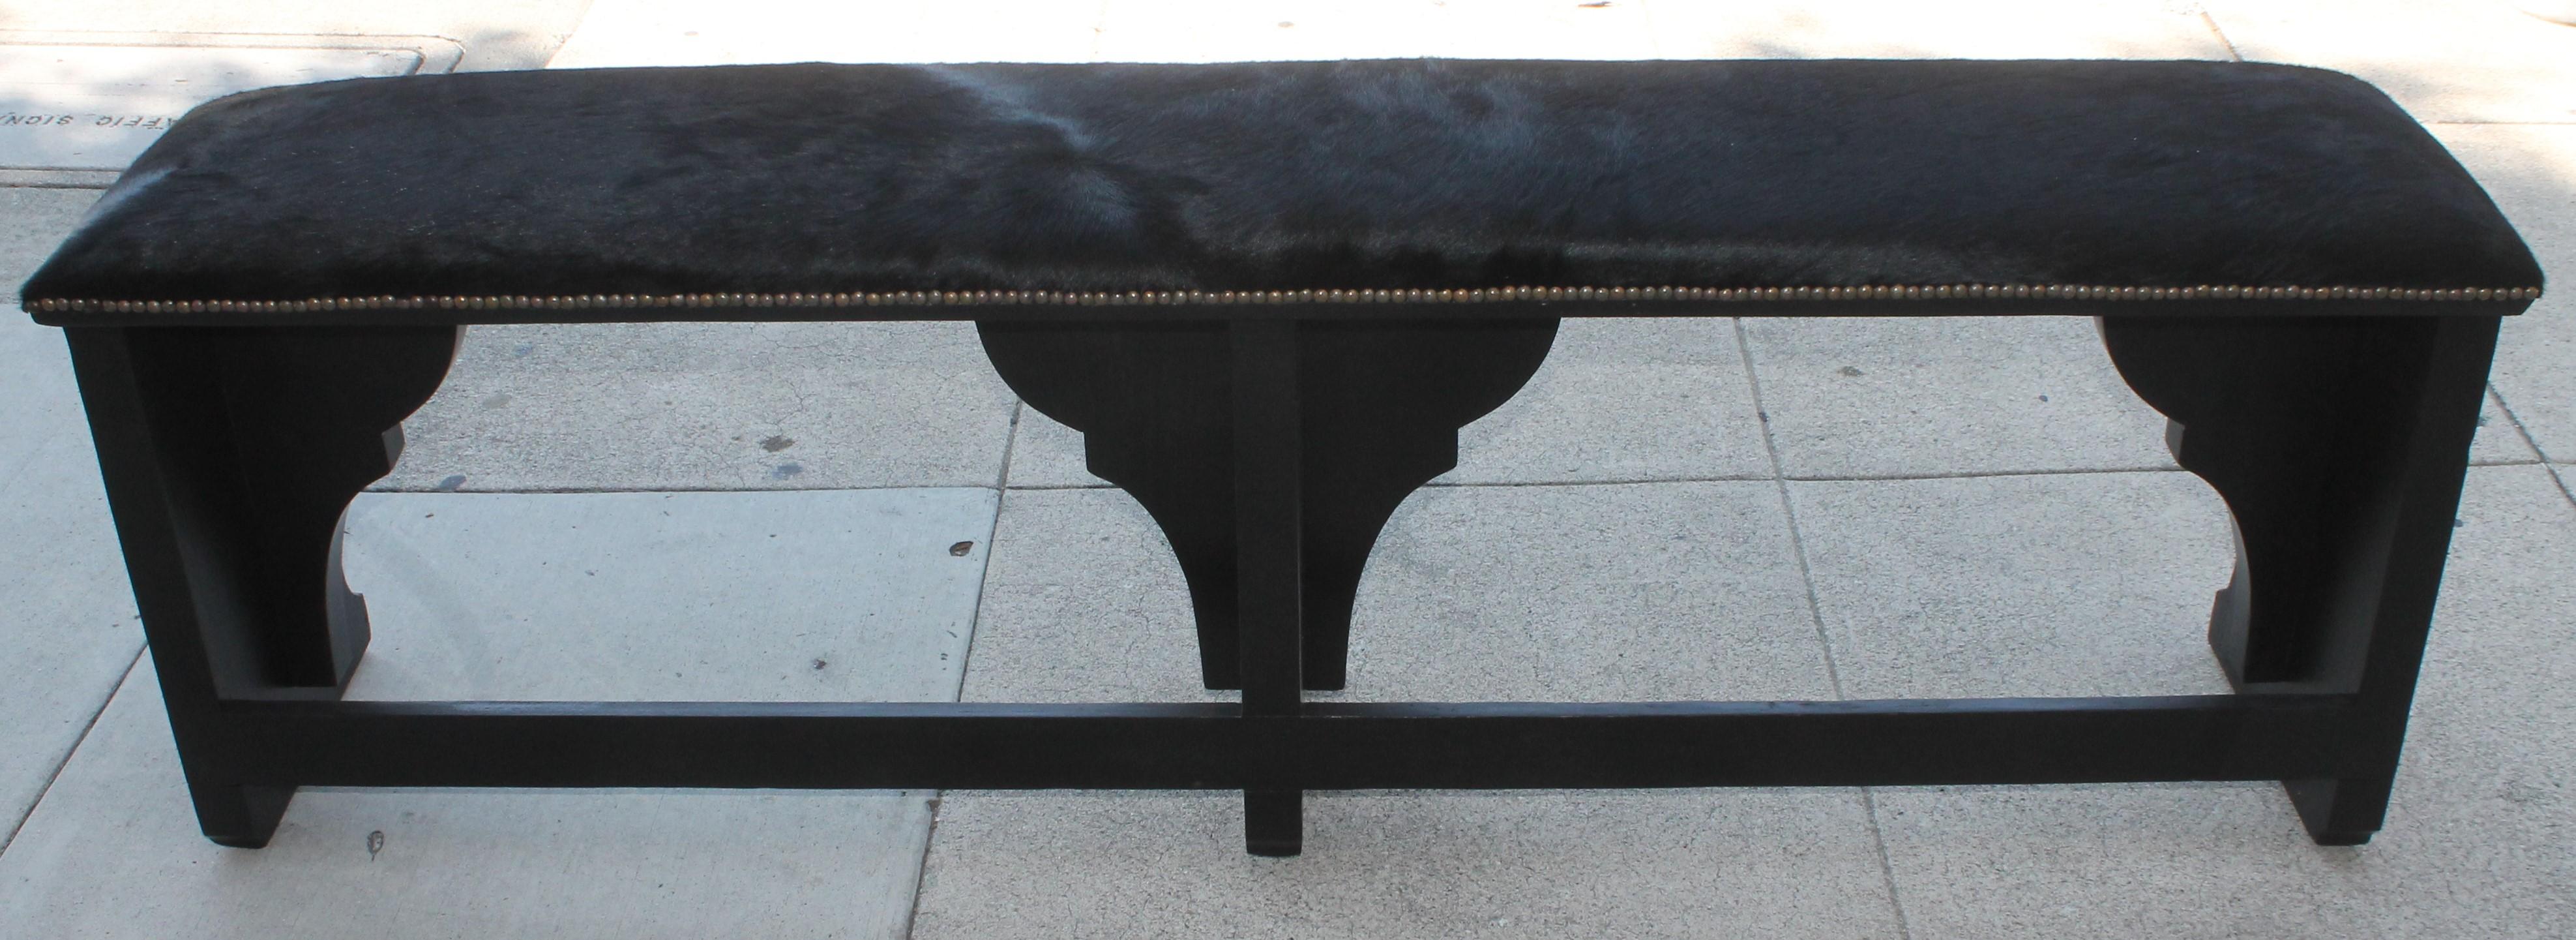 Hand-Crafted  Pair of 19th Century Rustic Black Painted Cowhide Benches